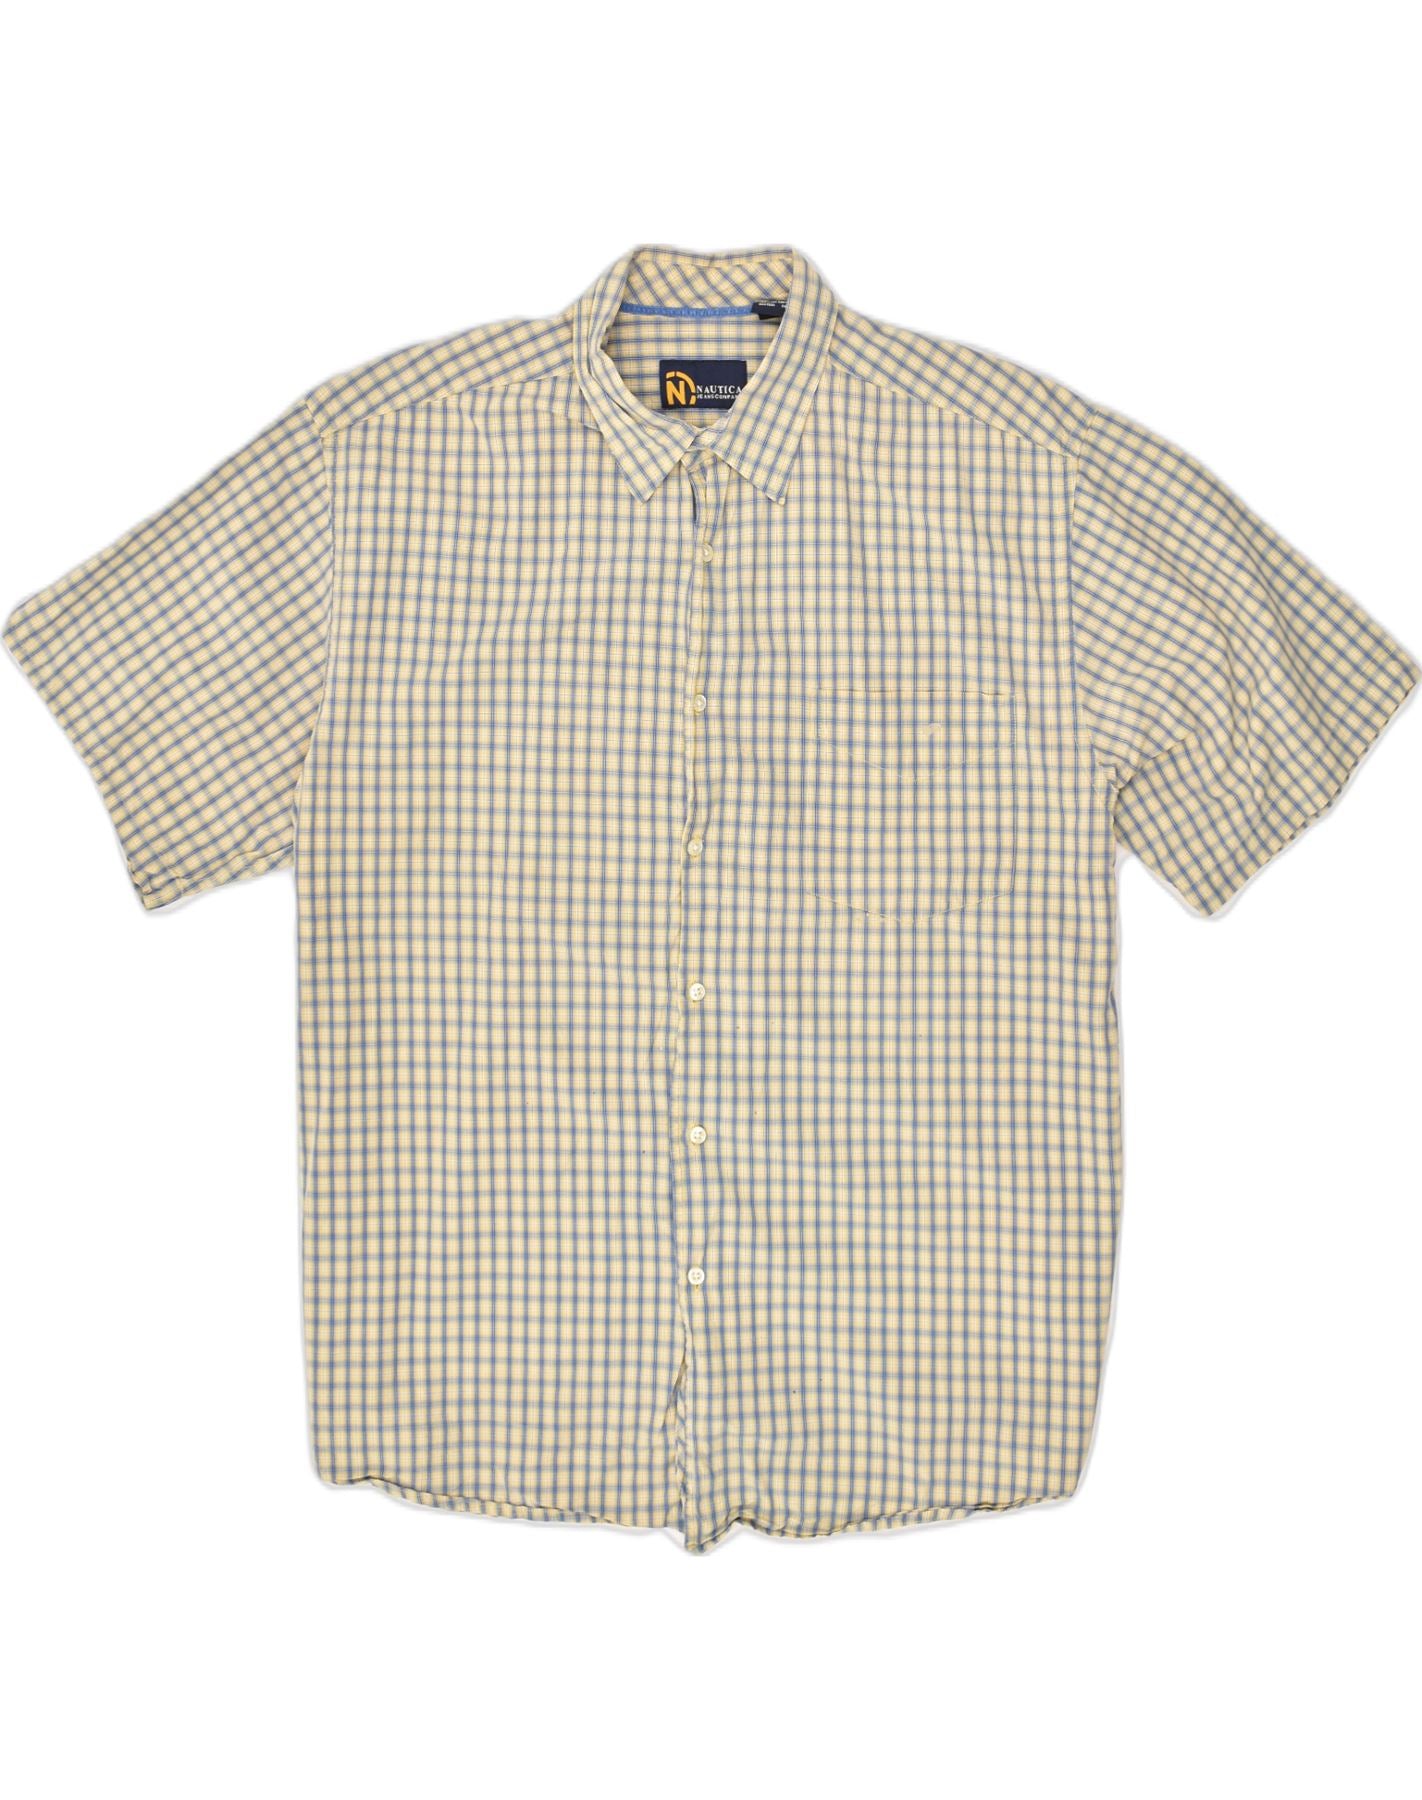 NAUTICA Mens Short Sleeve Shirt XL Yellow Check Cotton, Vintage &  Second-Hand Clothing Online